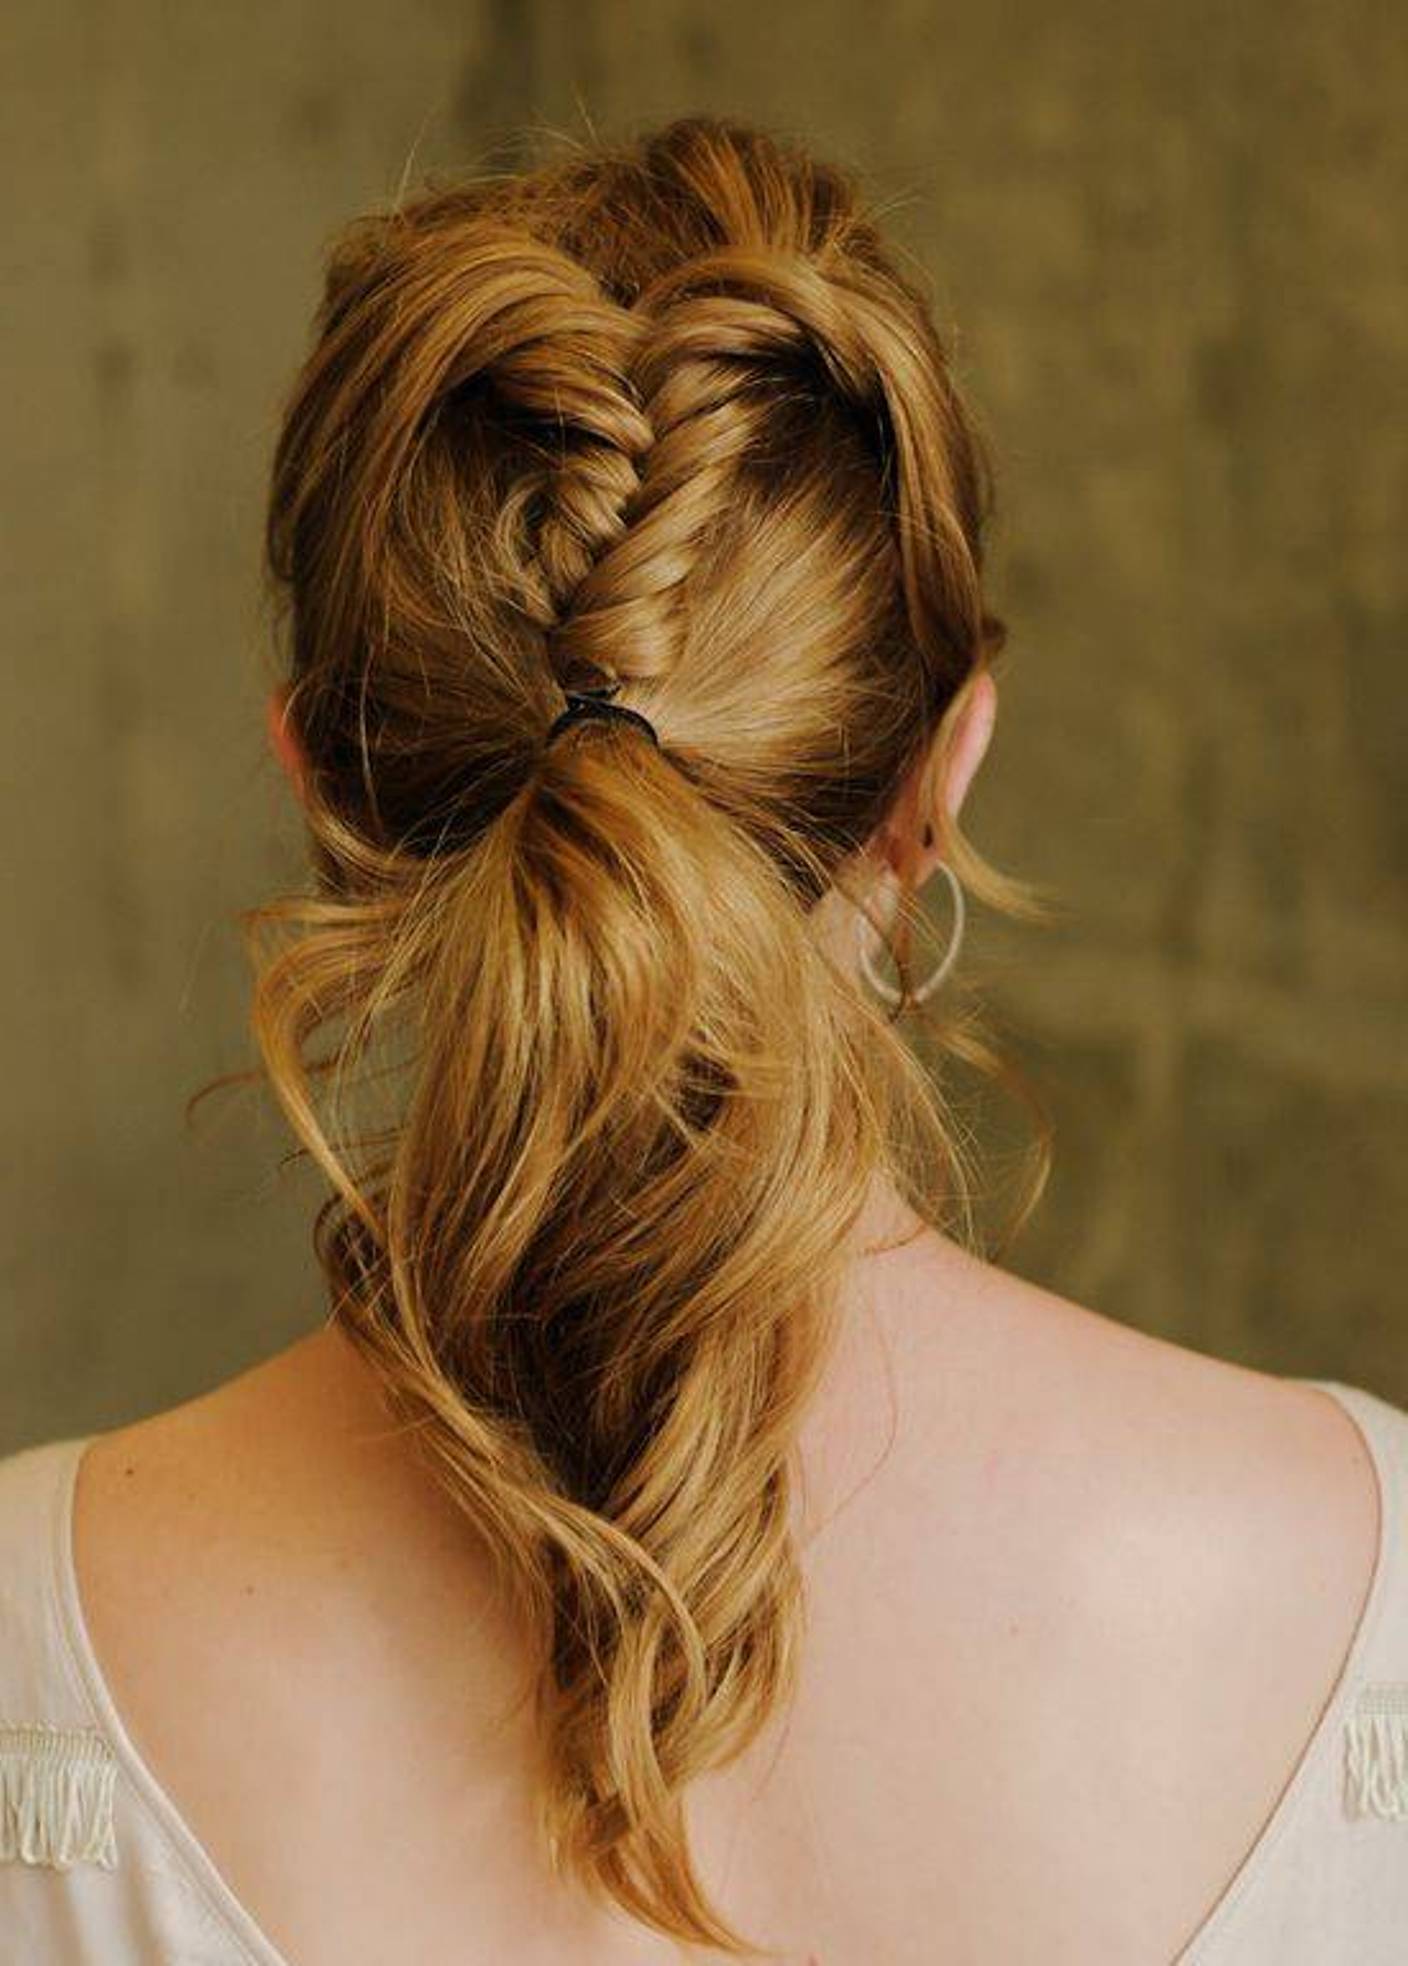 Wavy Topsy Tail Ponytail Hairstyle - fmag.com